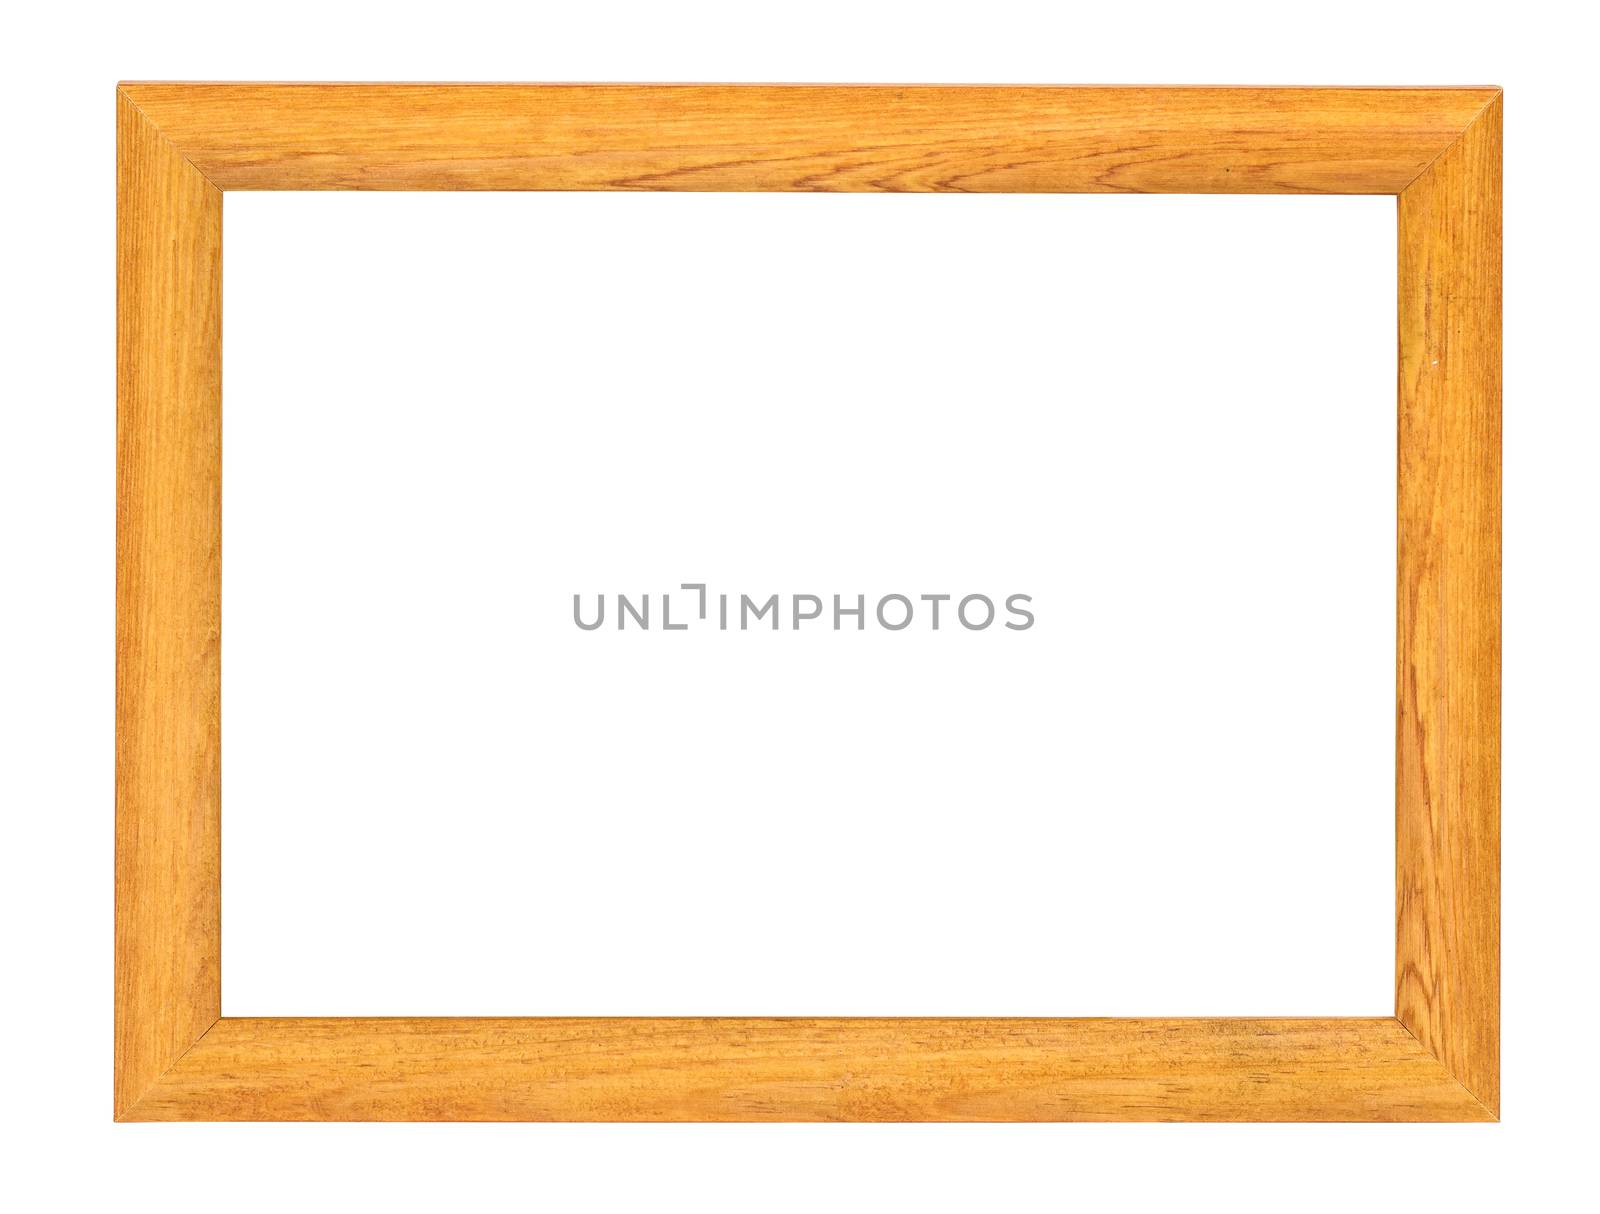 Wooden picture frame isolated on white background with clipping path